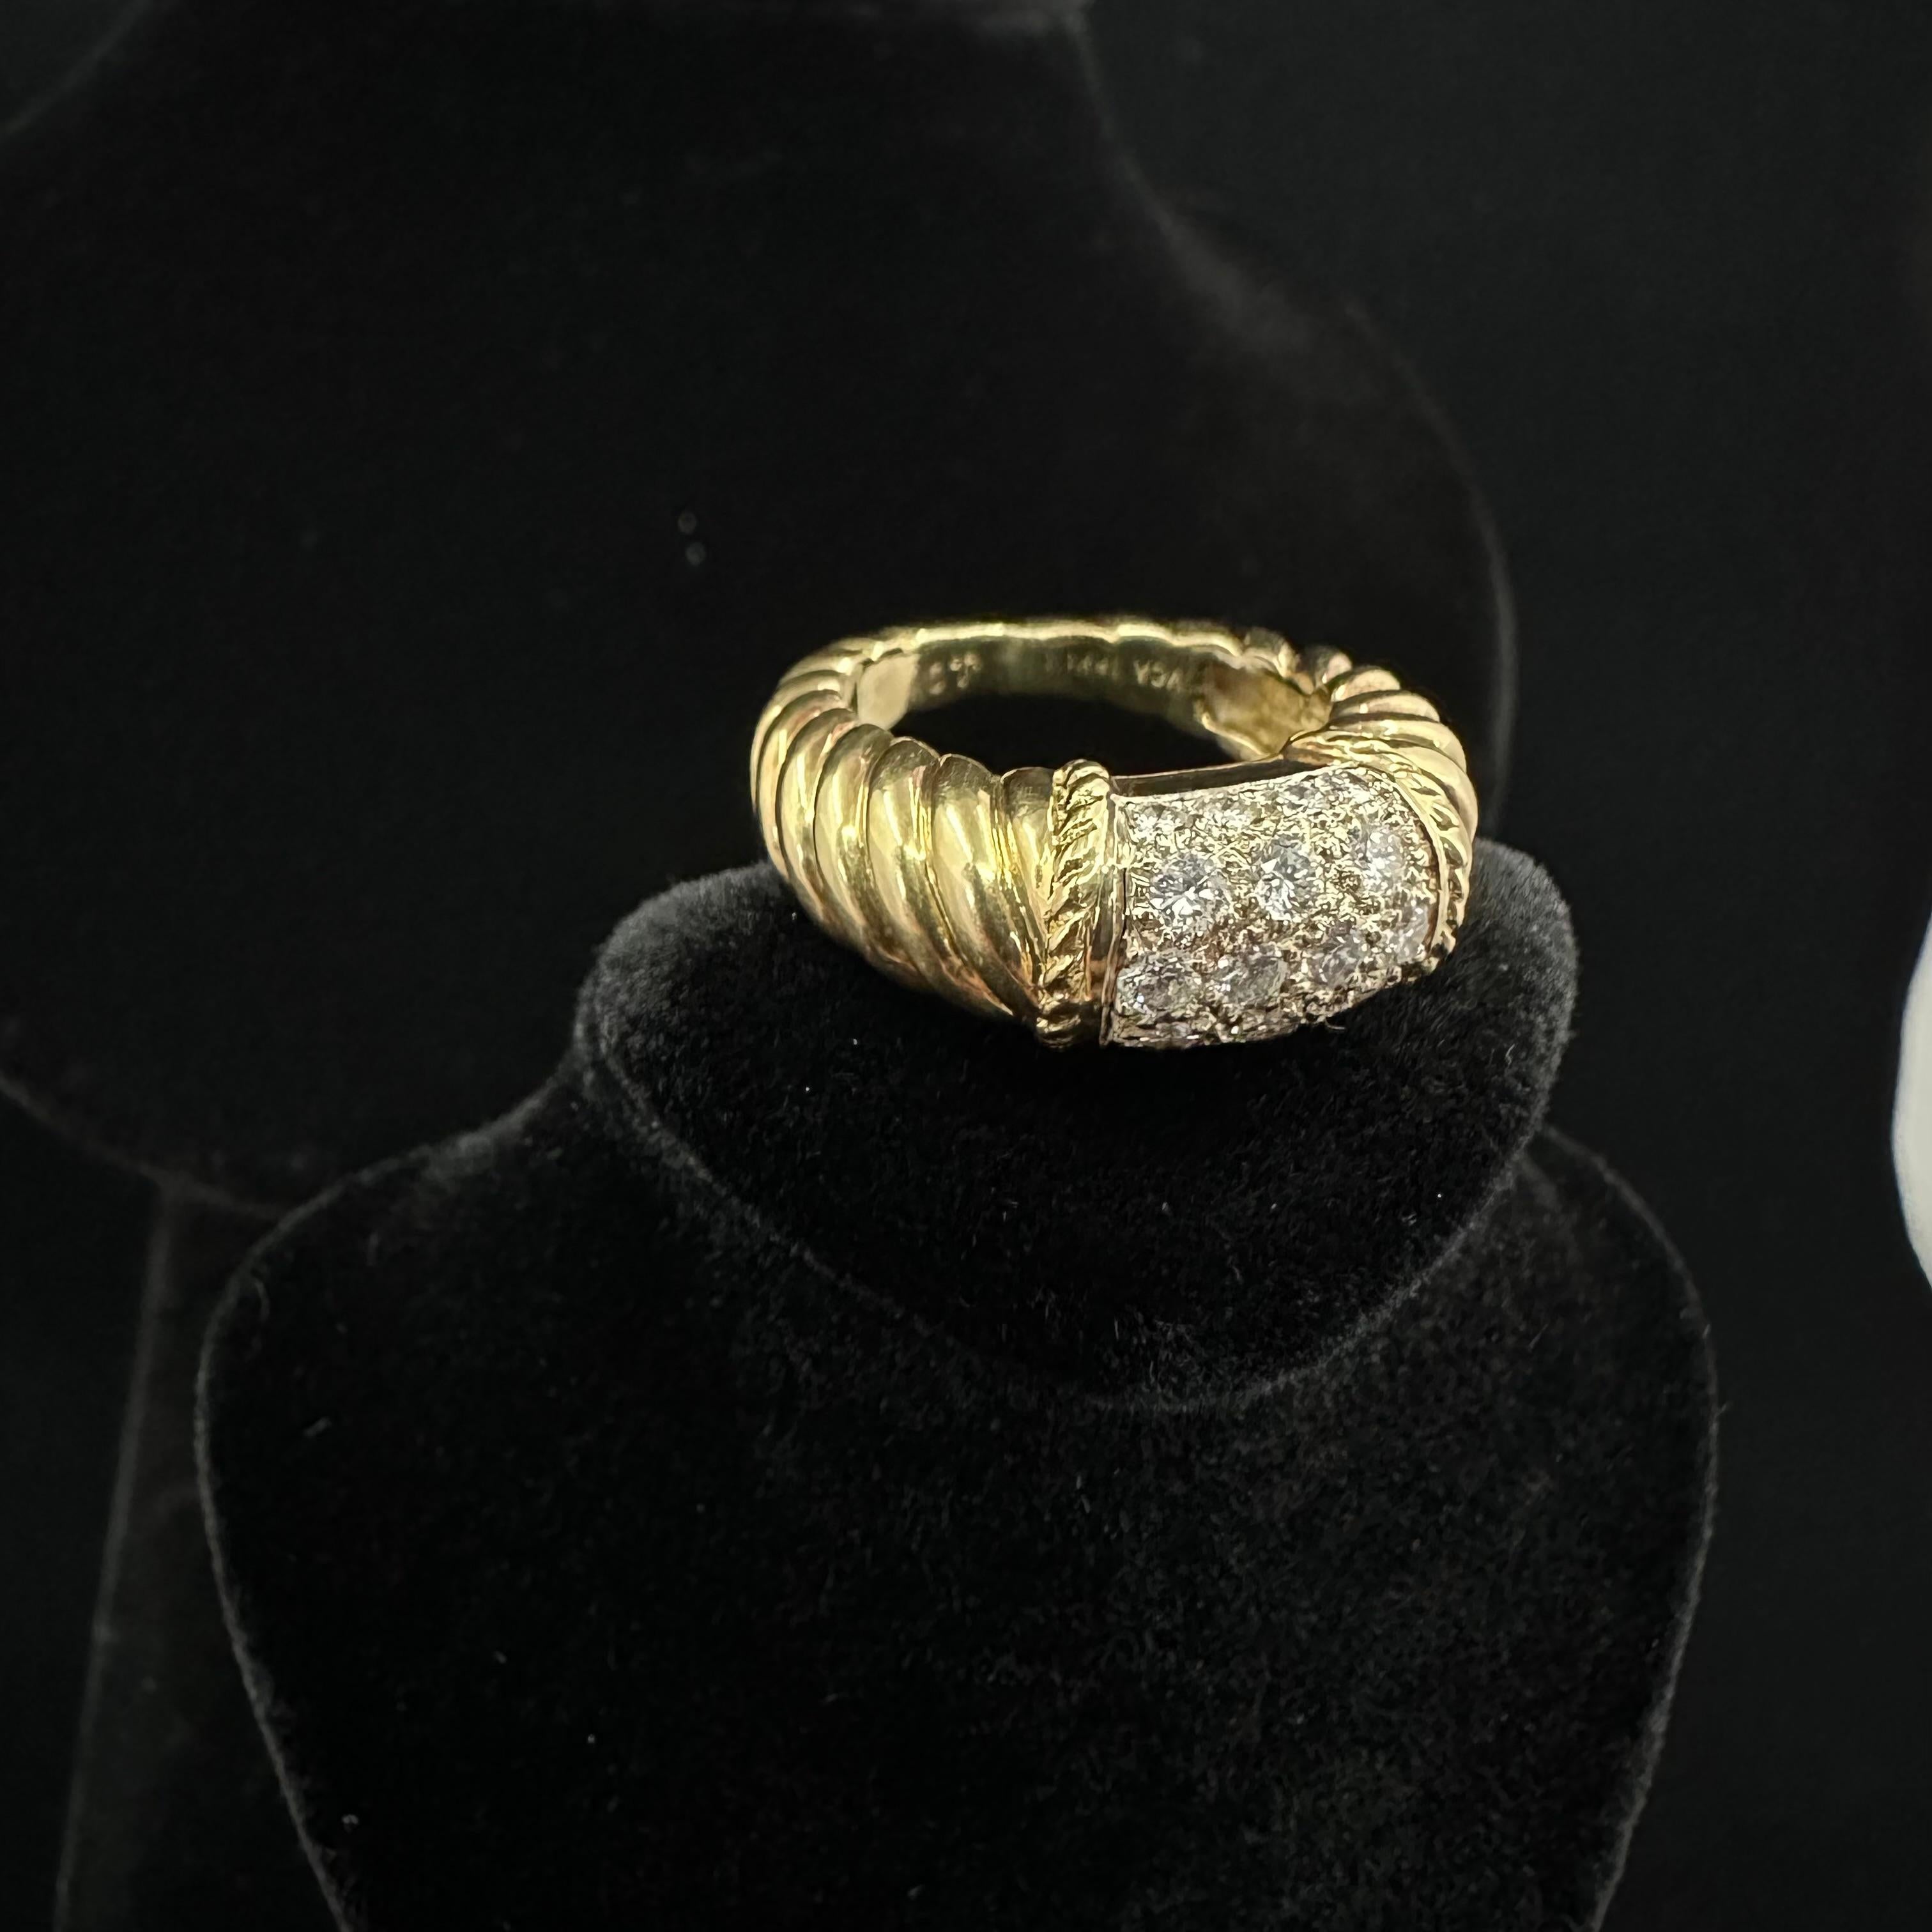 Van Cleef & Arpels Philippine Diamond ring  In Good Condition For Sale In Beverly Hills, CA